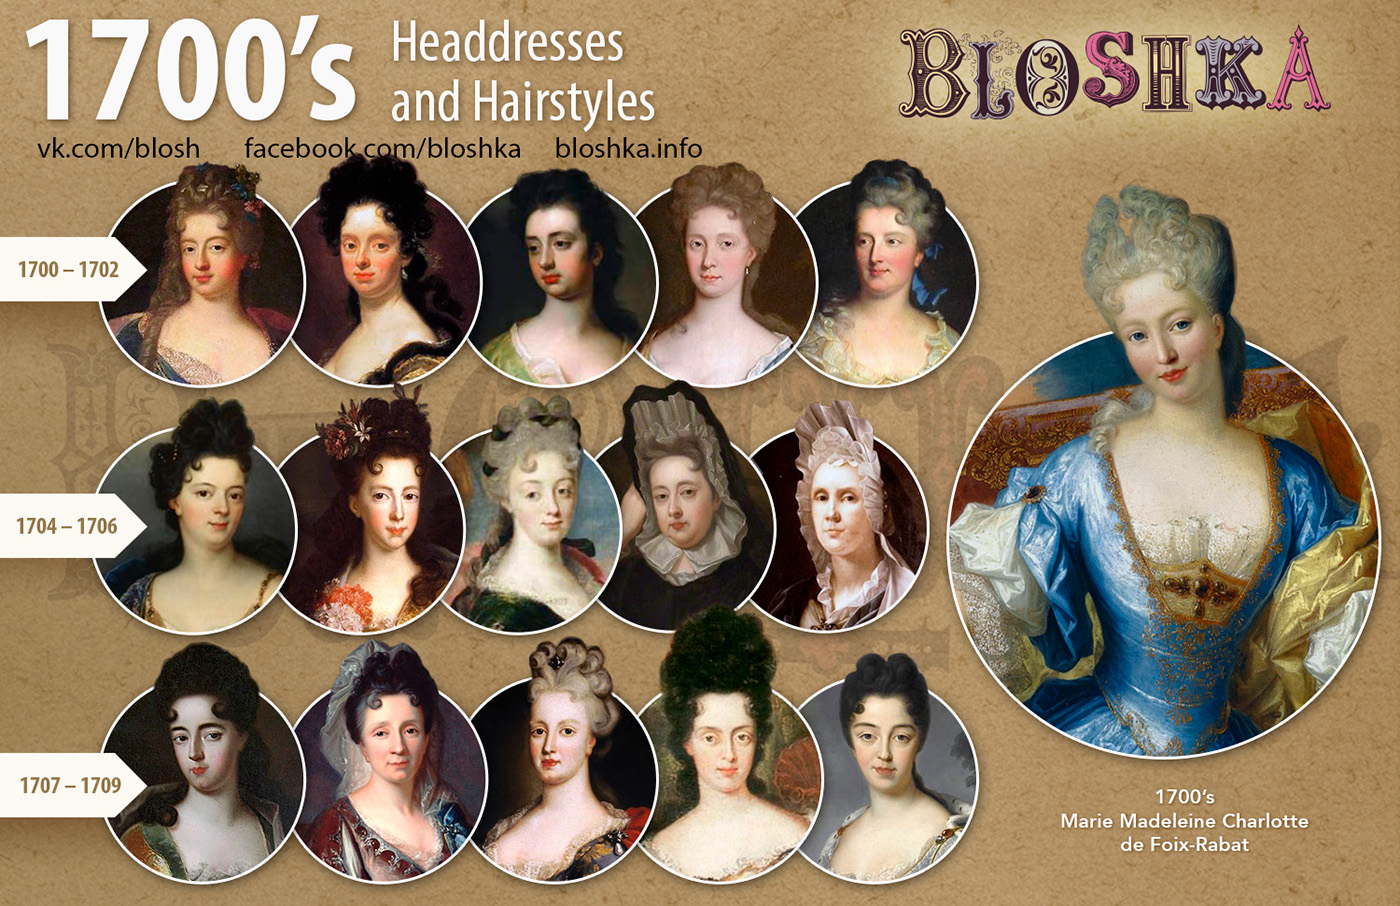 women's headdresses and hairstyles. 18th century. on behance